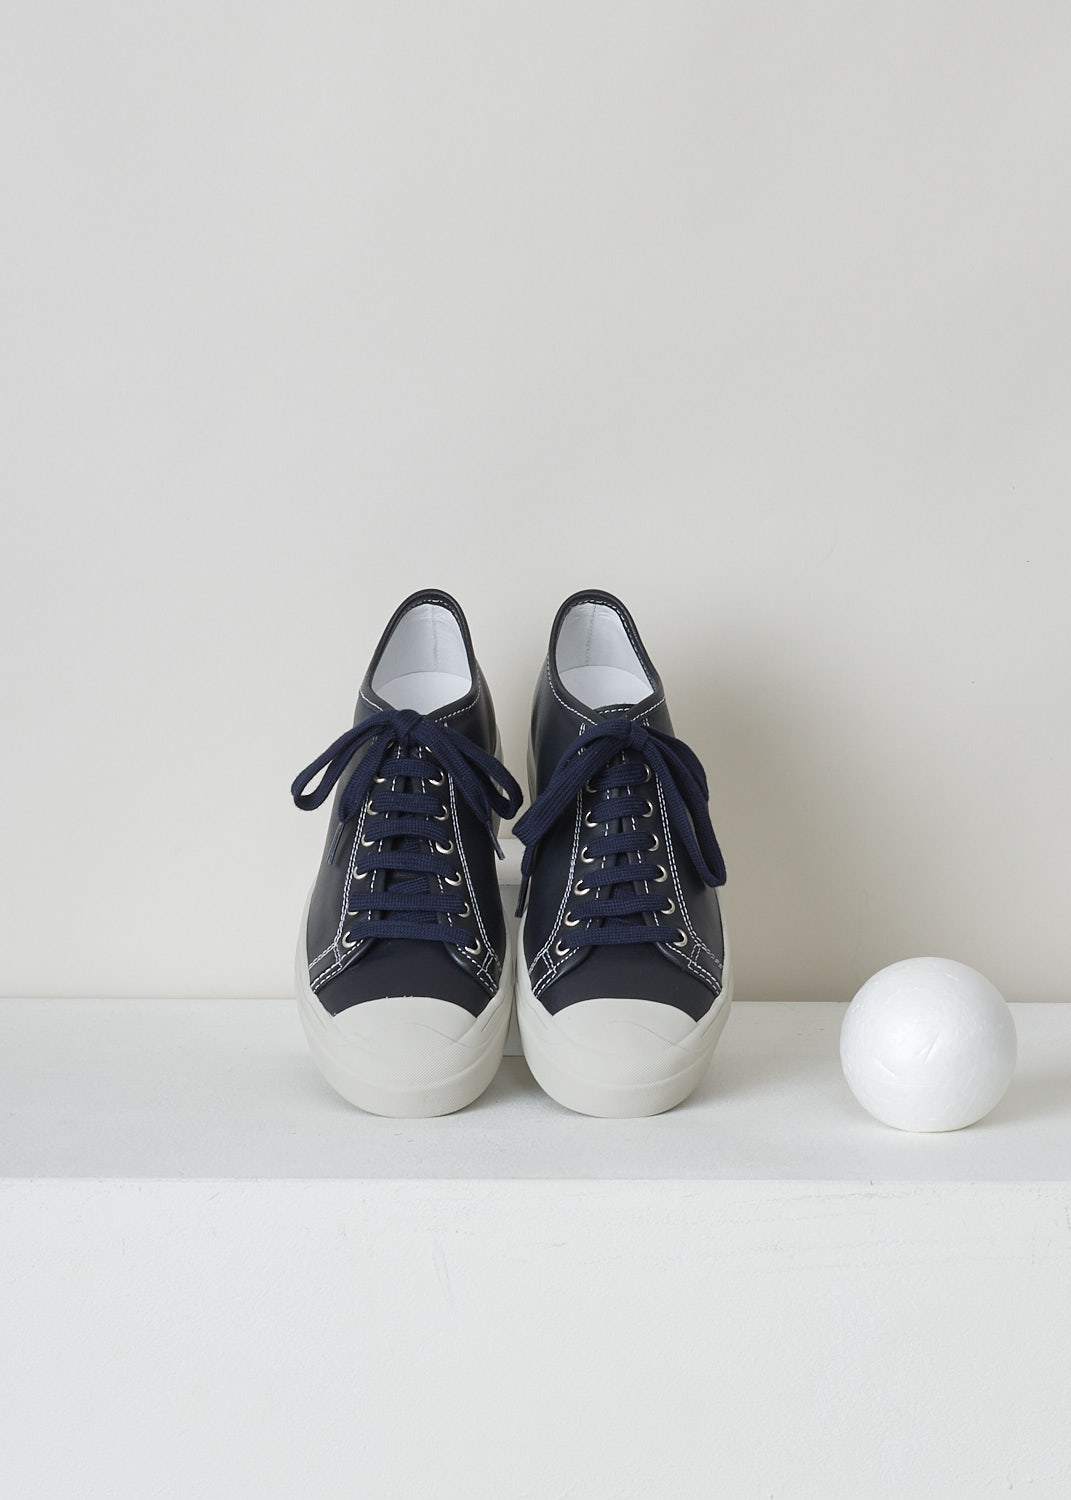 SOFIE D’HOORE, MIDNIGHT BLUE LEATHER SHOES, FOLK_LMAST_LMAST_MIDNIGHT, Blue, Top, These midnight blue leather sneakers feature a front lace-up closure with dark blue laces. These sneakers have a round toe with a white rubber toe cap that goes down into the white rubber sole. Contrasting white stitching is used throughout. The sneakers come with additional pair of white laces.
